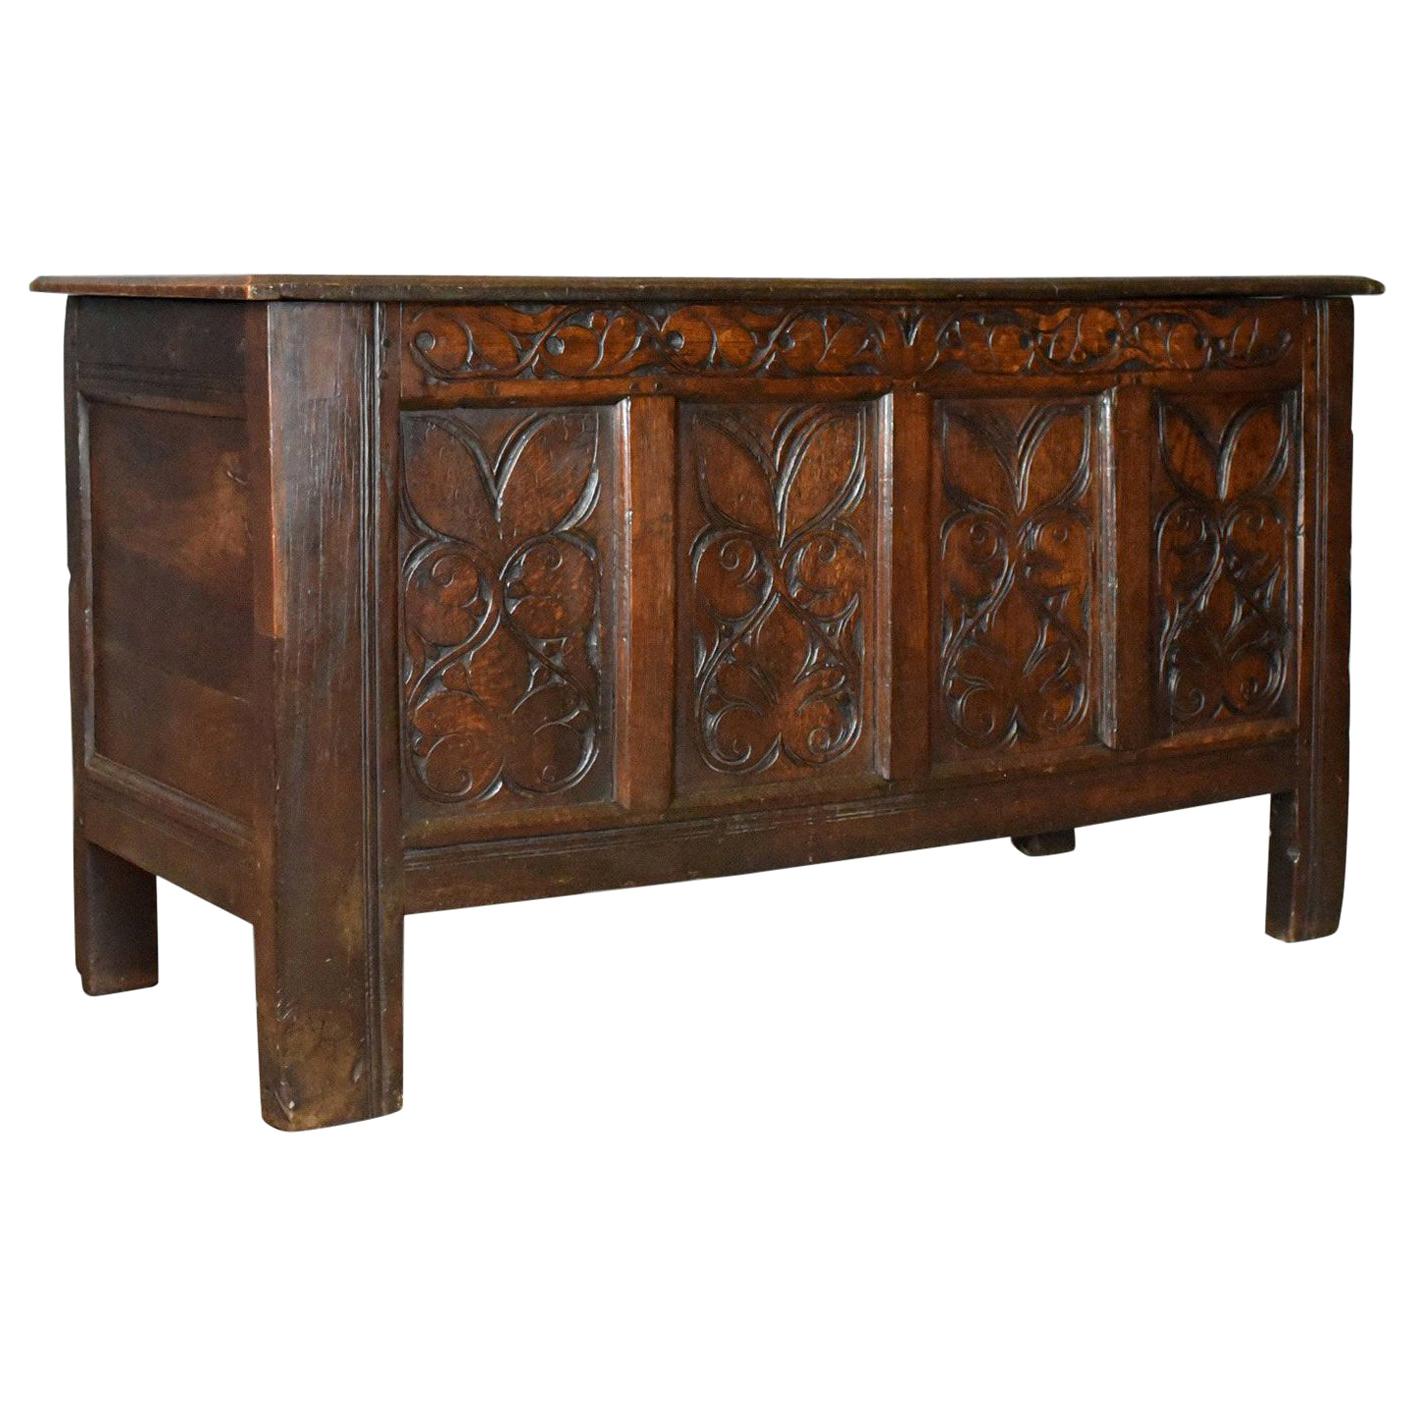 Antique Coffer, Large, English Oak Chest, Early 18th Century Trunk, circa 1700 For Sale